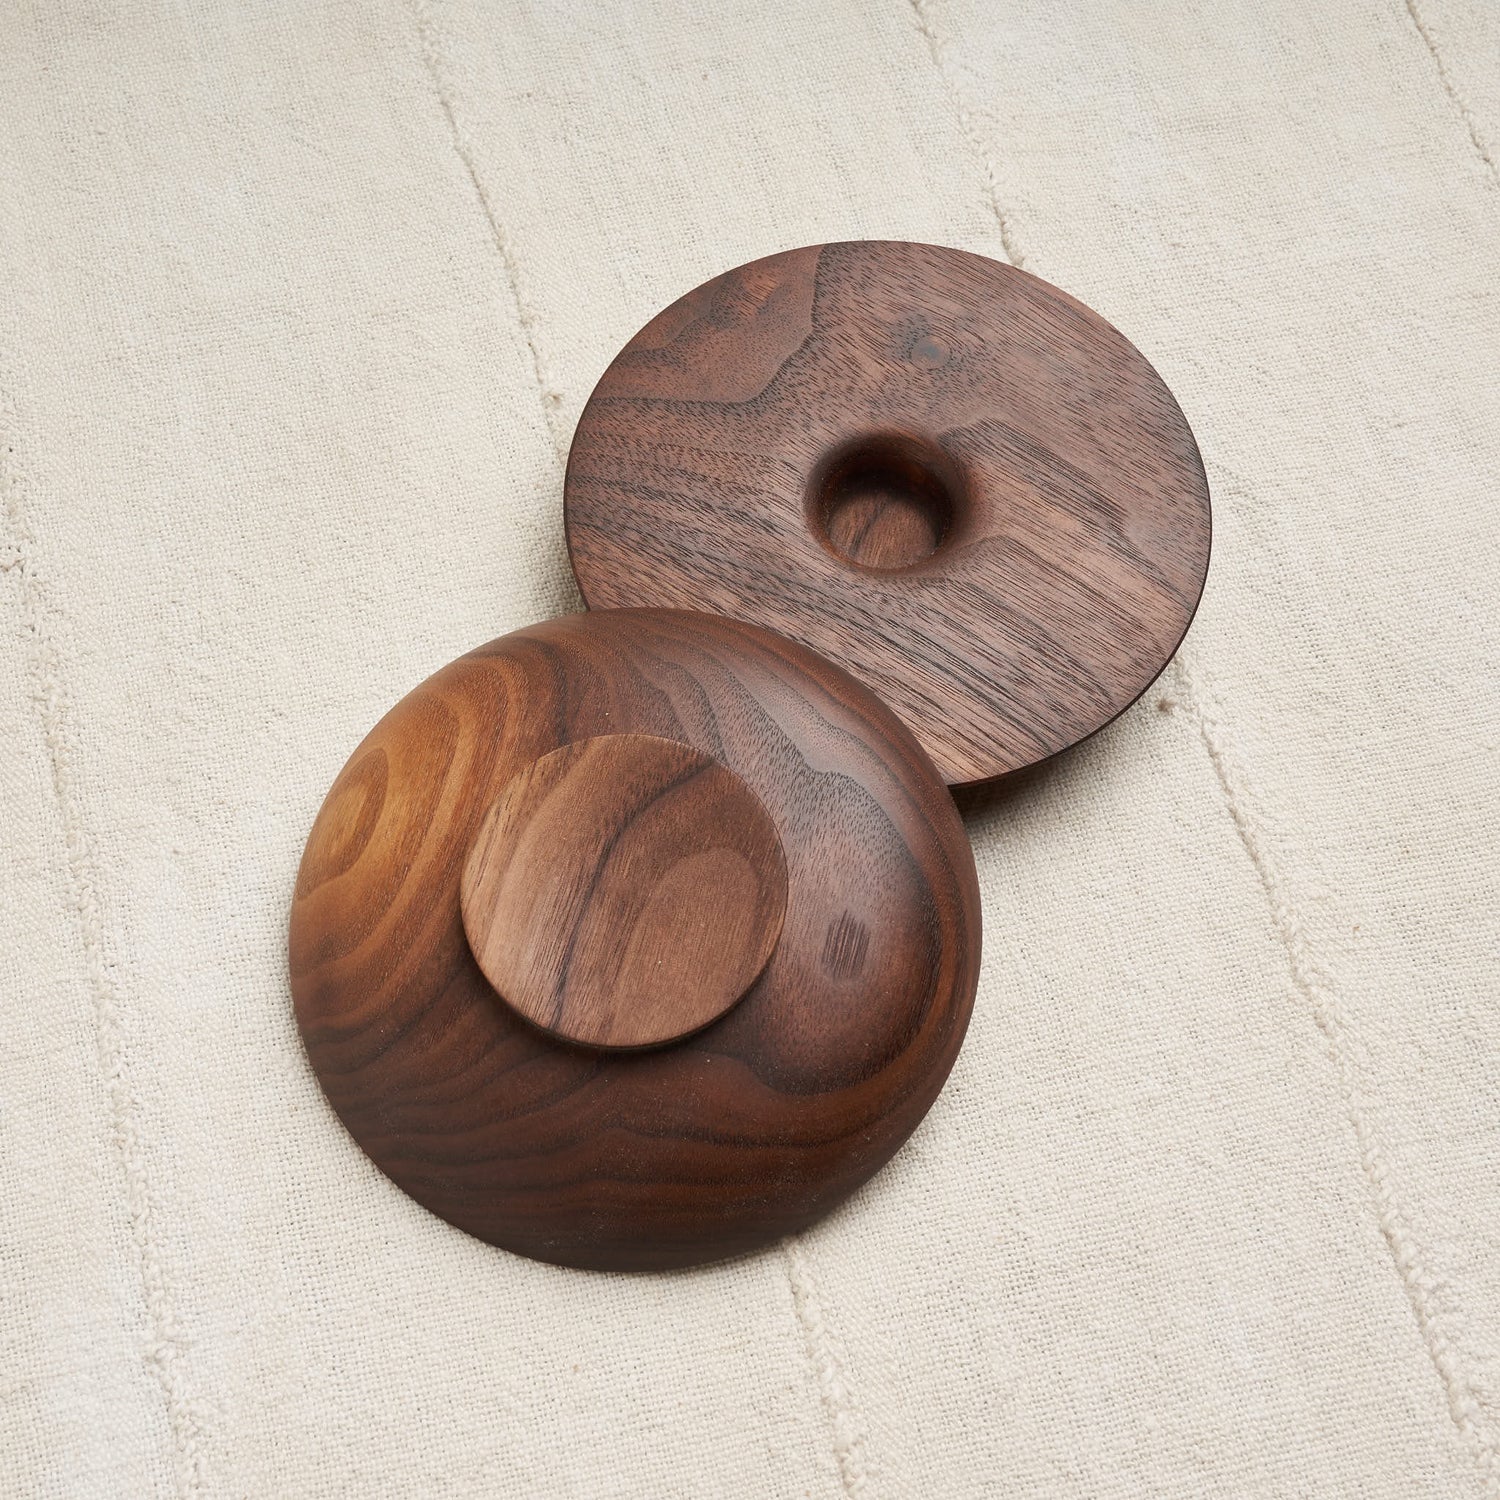 Hand-Turned Candlestick Holders, Natural Walnut